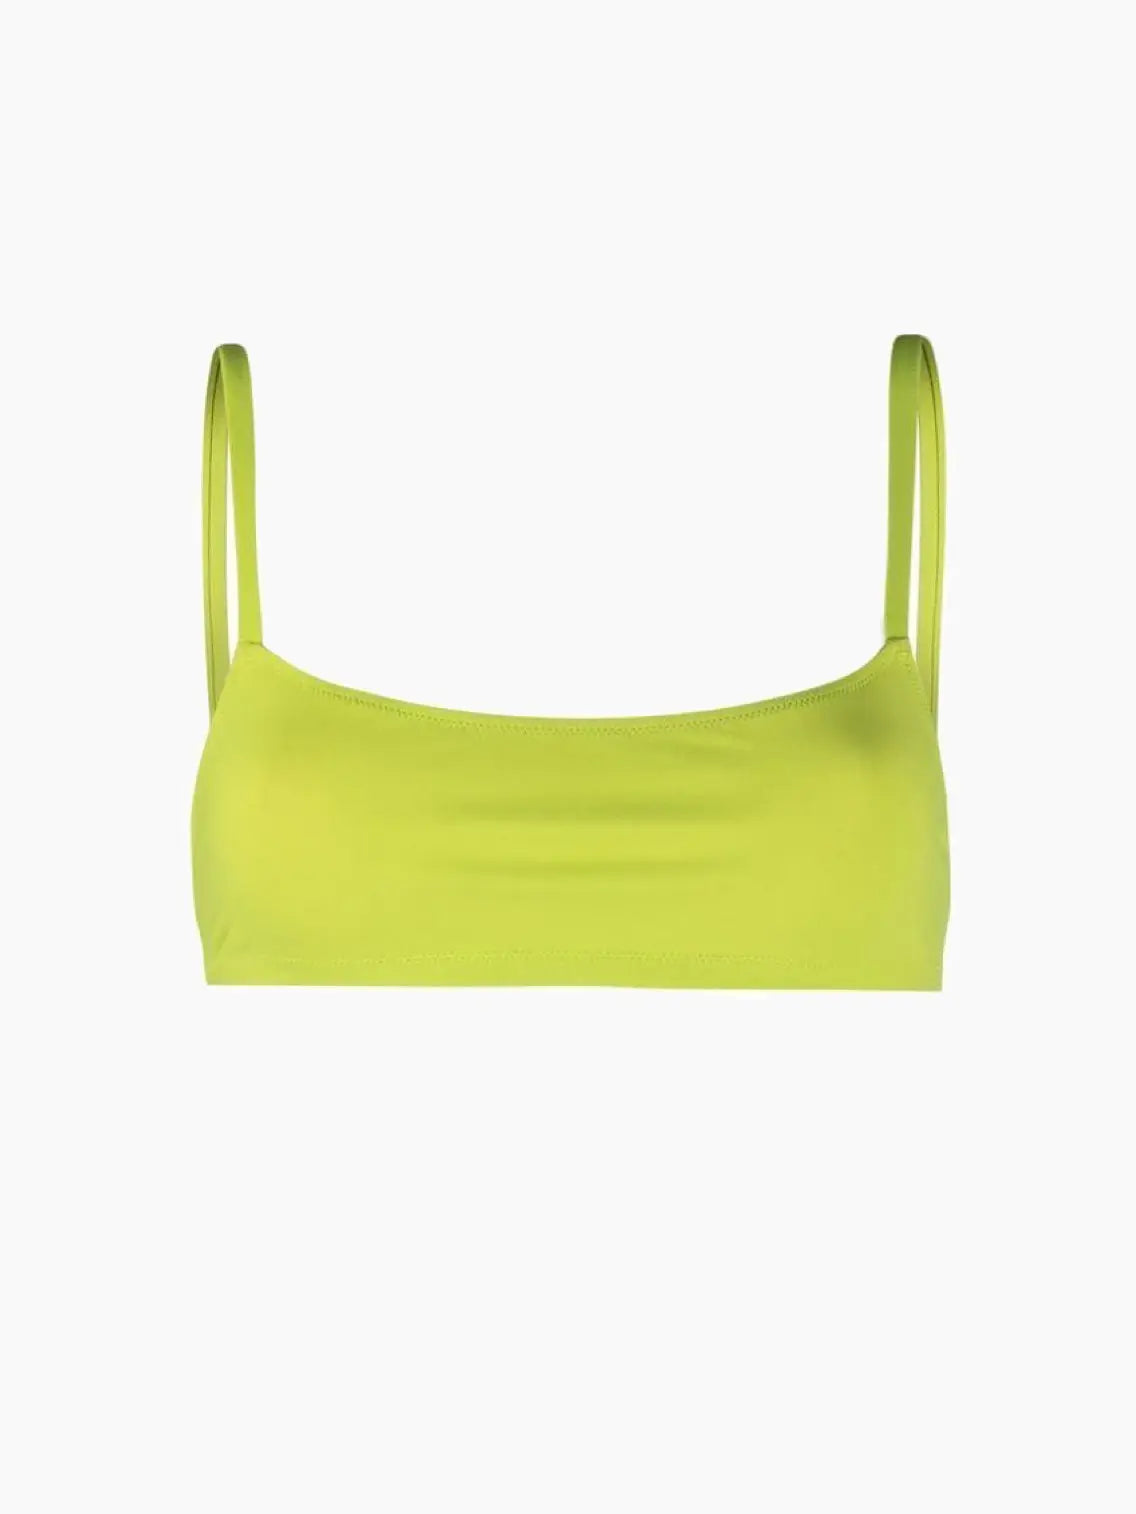 An Undici Bikini Top Lime from Lido is displayed against a plain white background. The top, available at our Barcelona store, features thin adjustable straps and a simple bandeau design with a smooth texture.